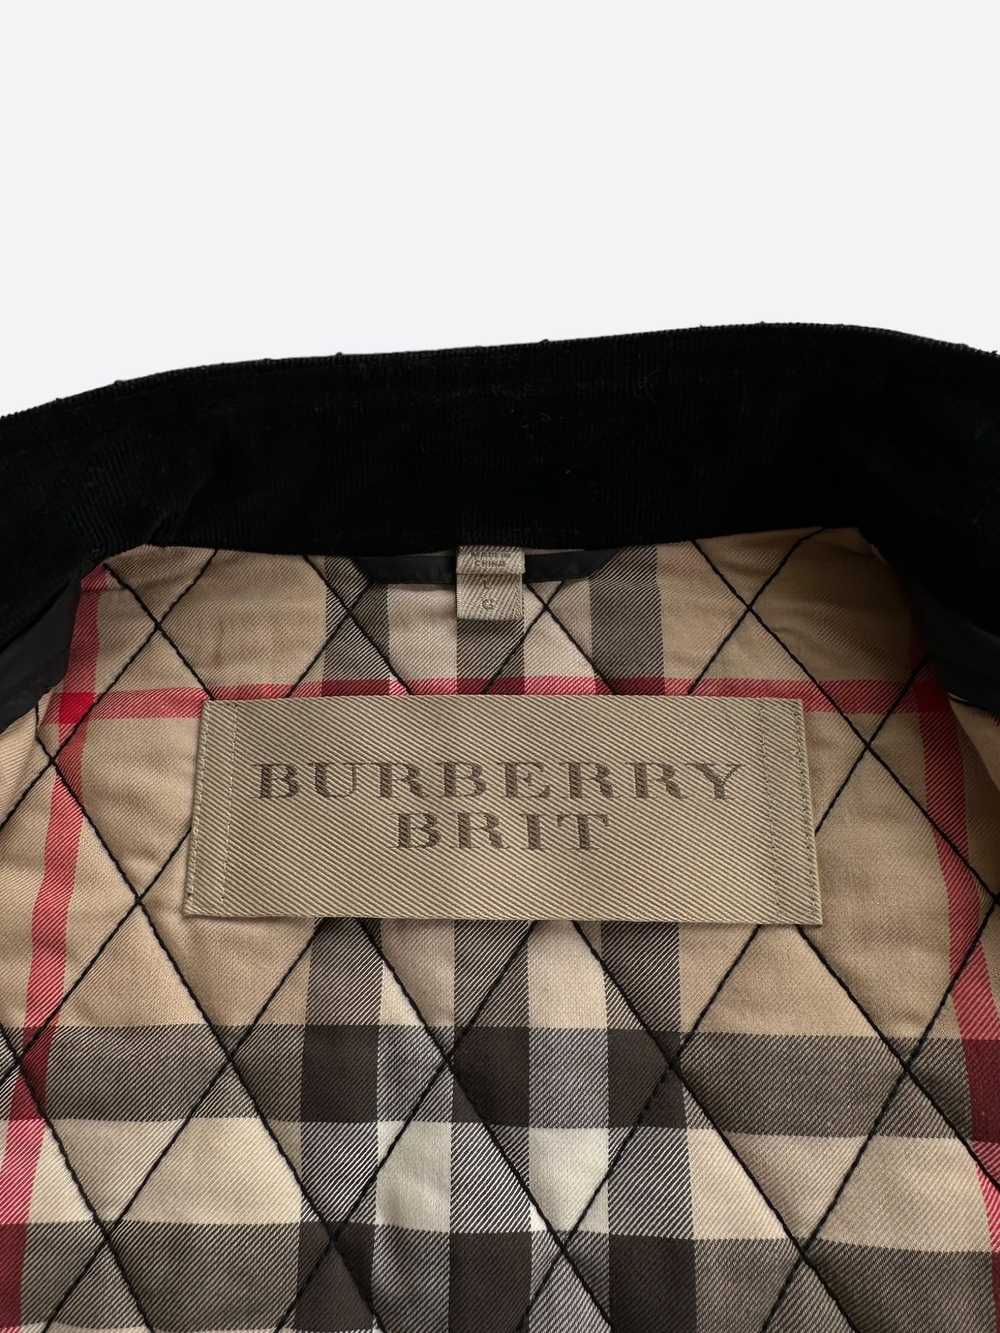 Burberry Burberry Brit Black Quilted Zip Up Jacket - image 3